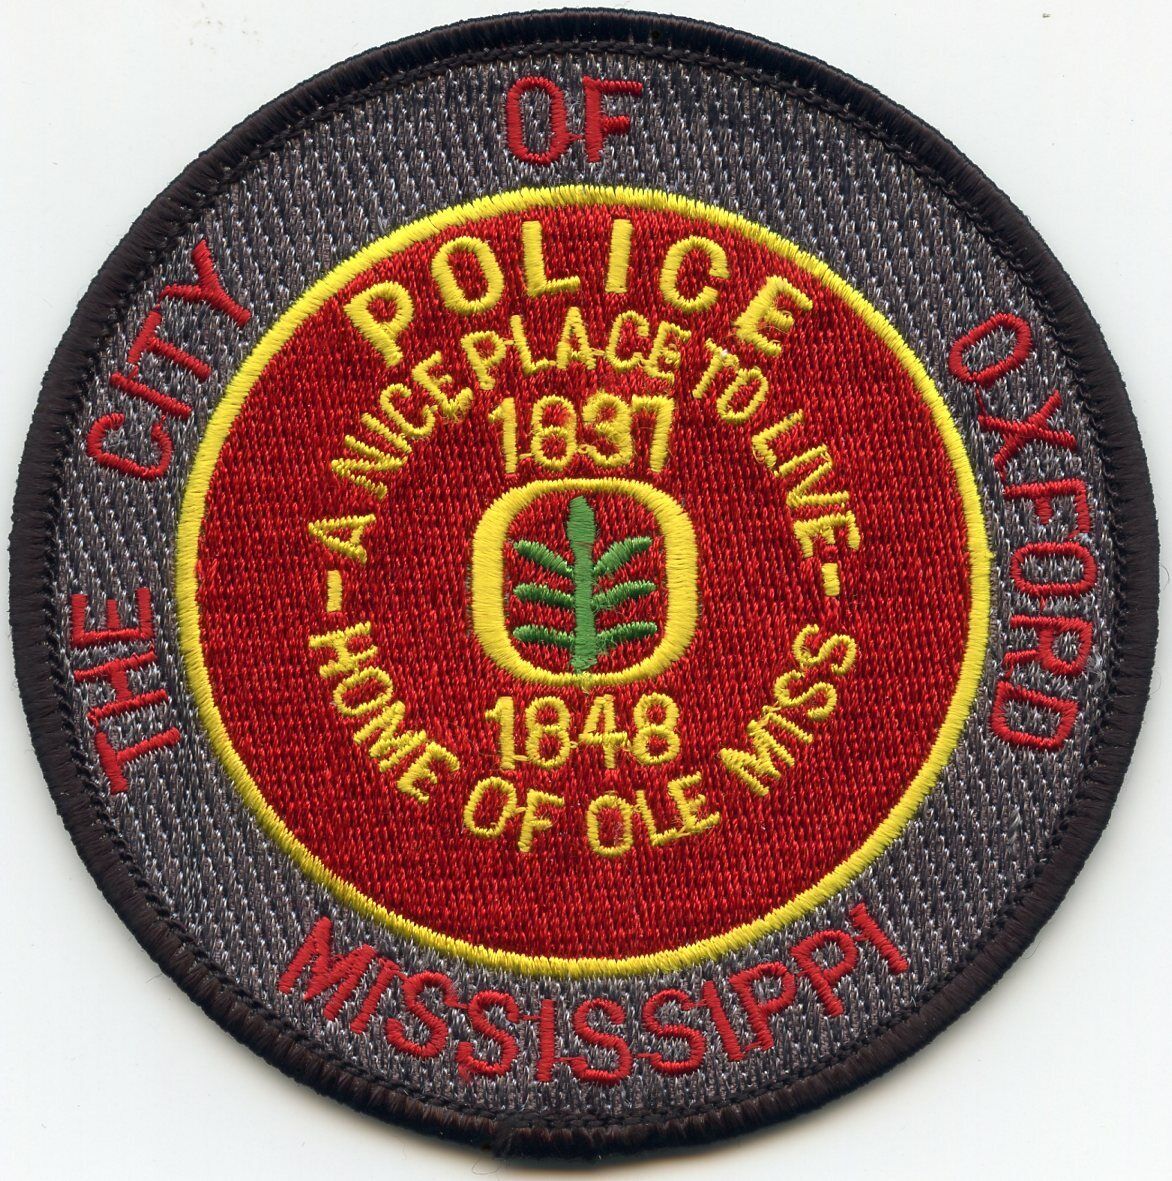 OXFORD MISSISSIPPI MS Home of Ole Miss POLICE PATCH